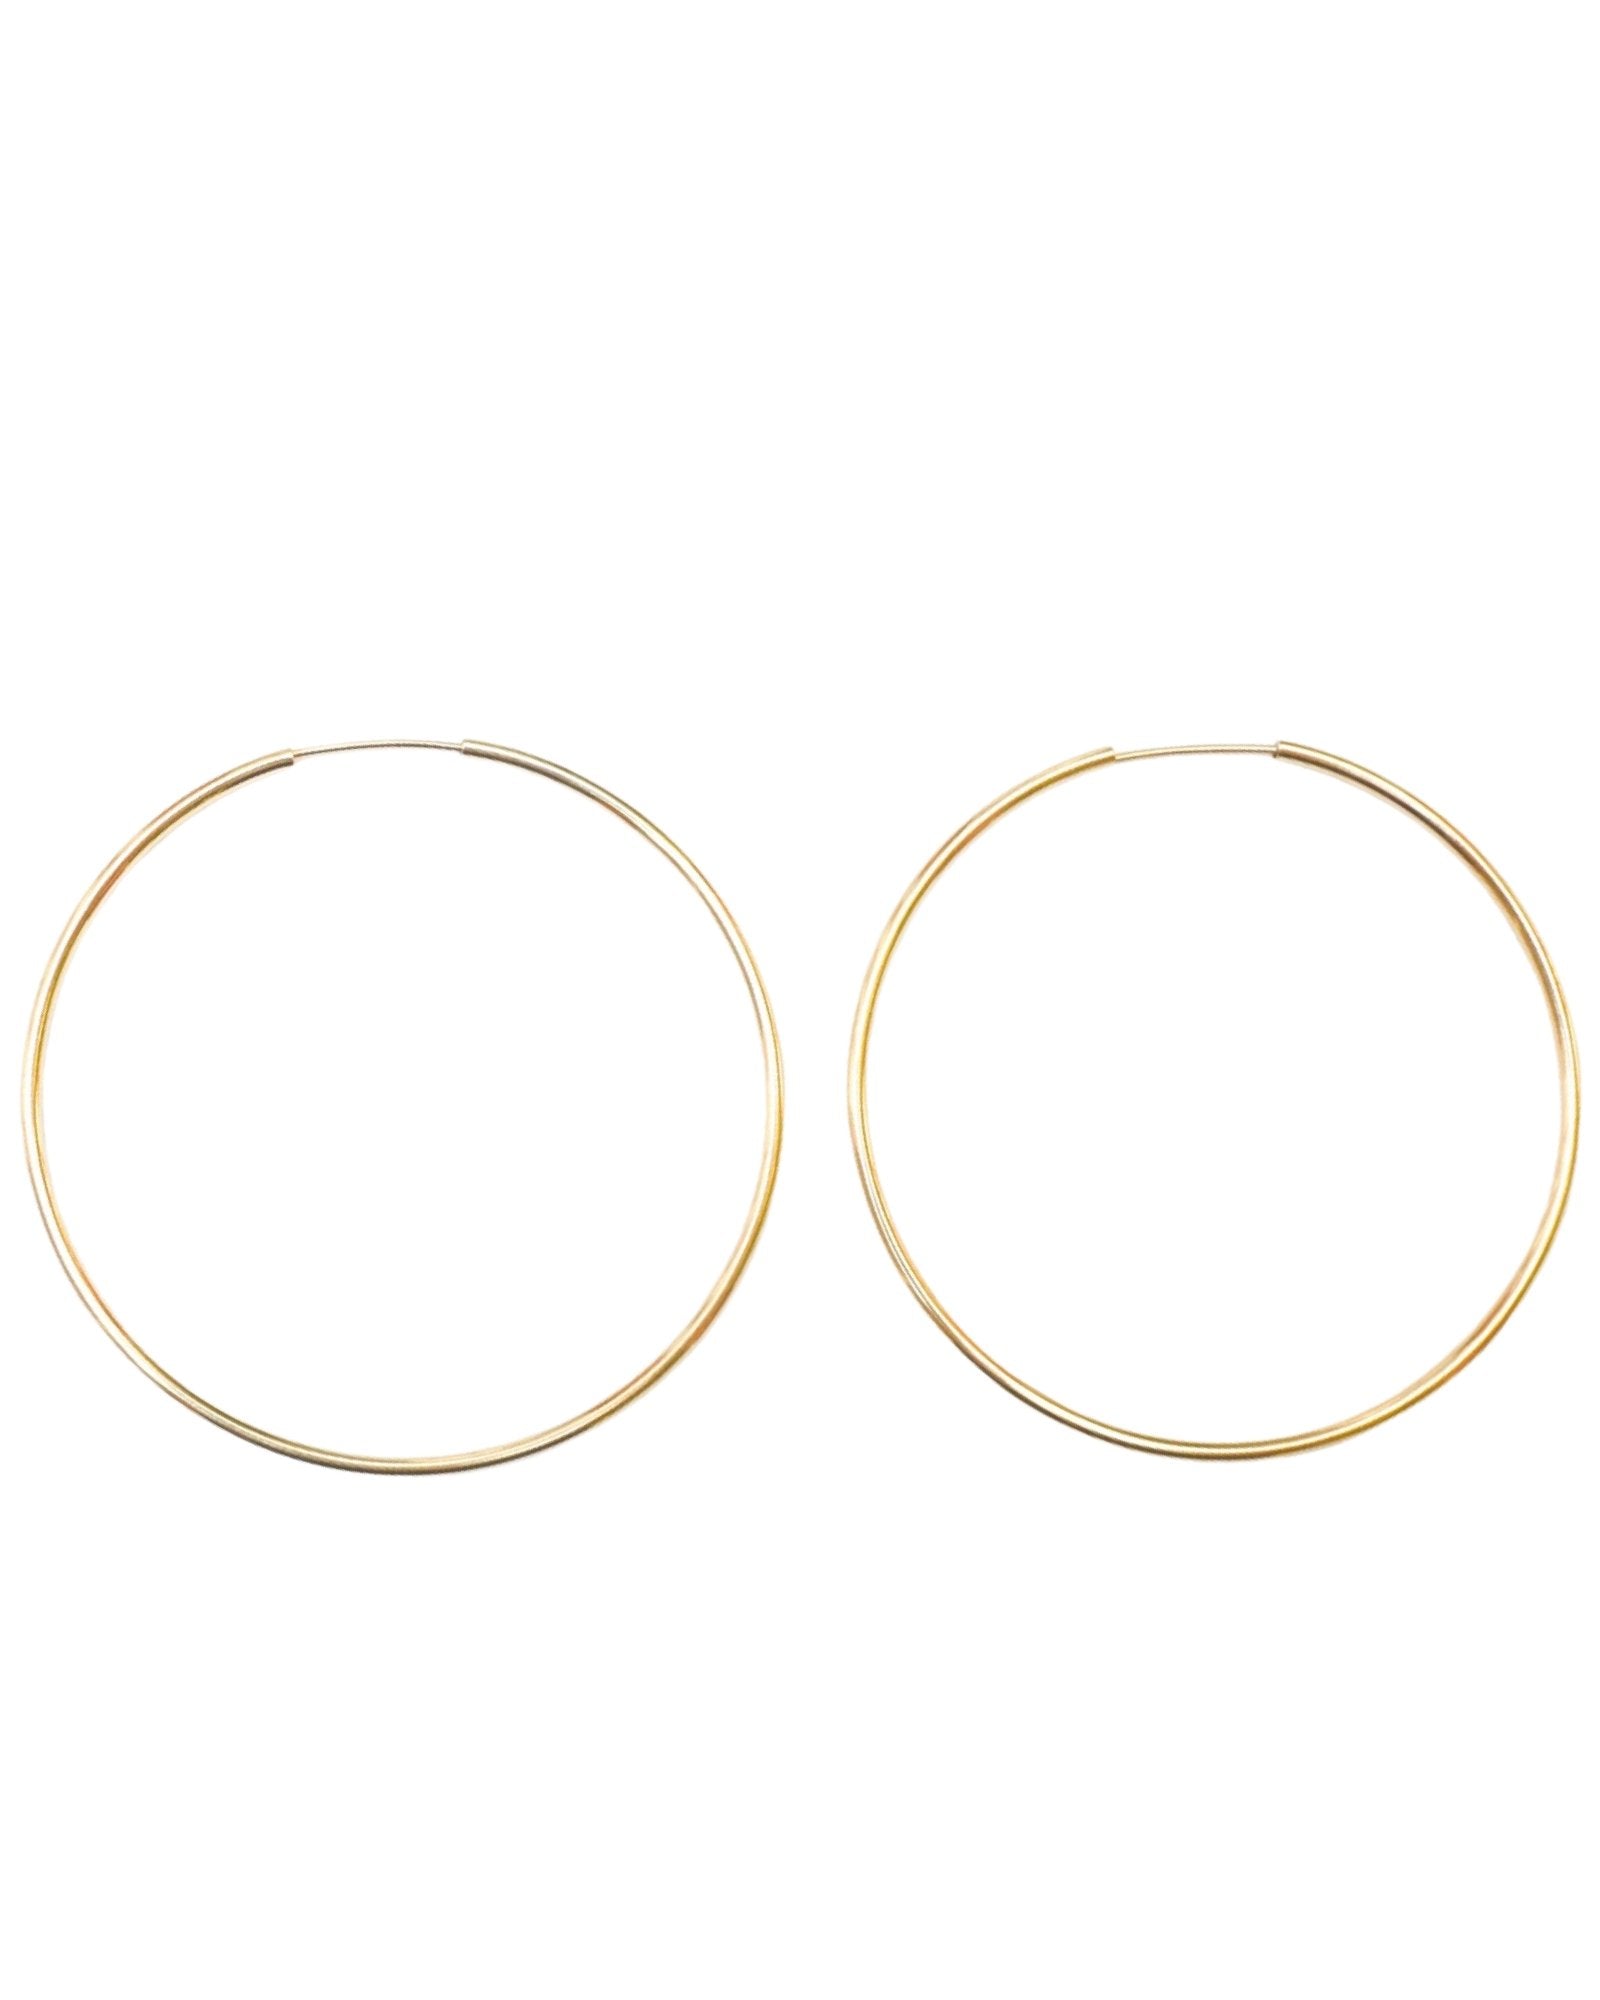 THE EXTRA HOOPS - DE.FINE Collection Jewelry